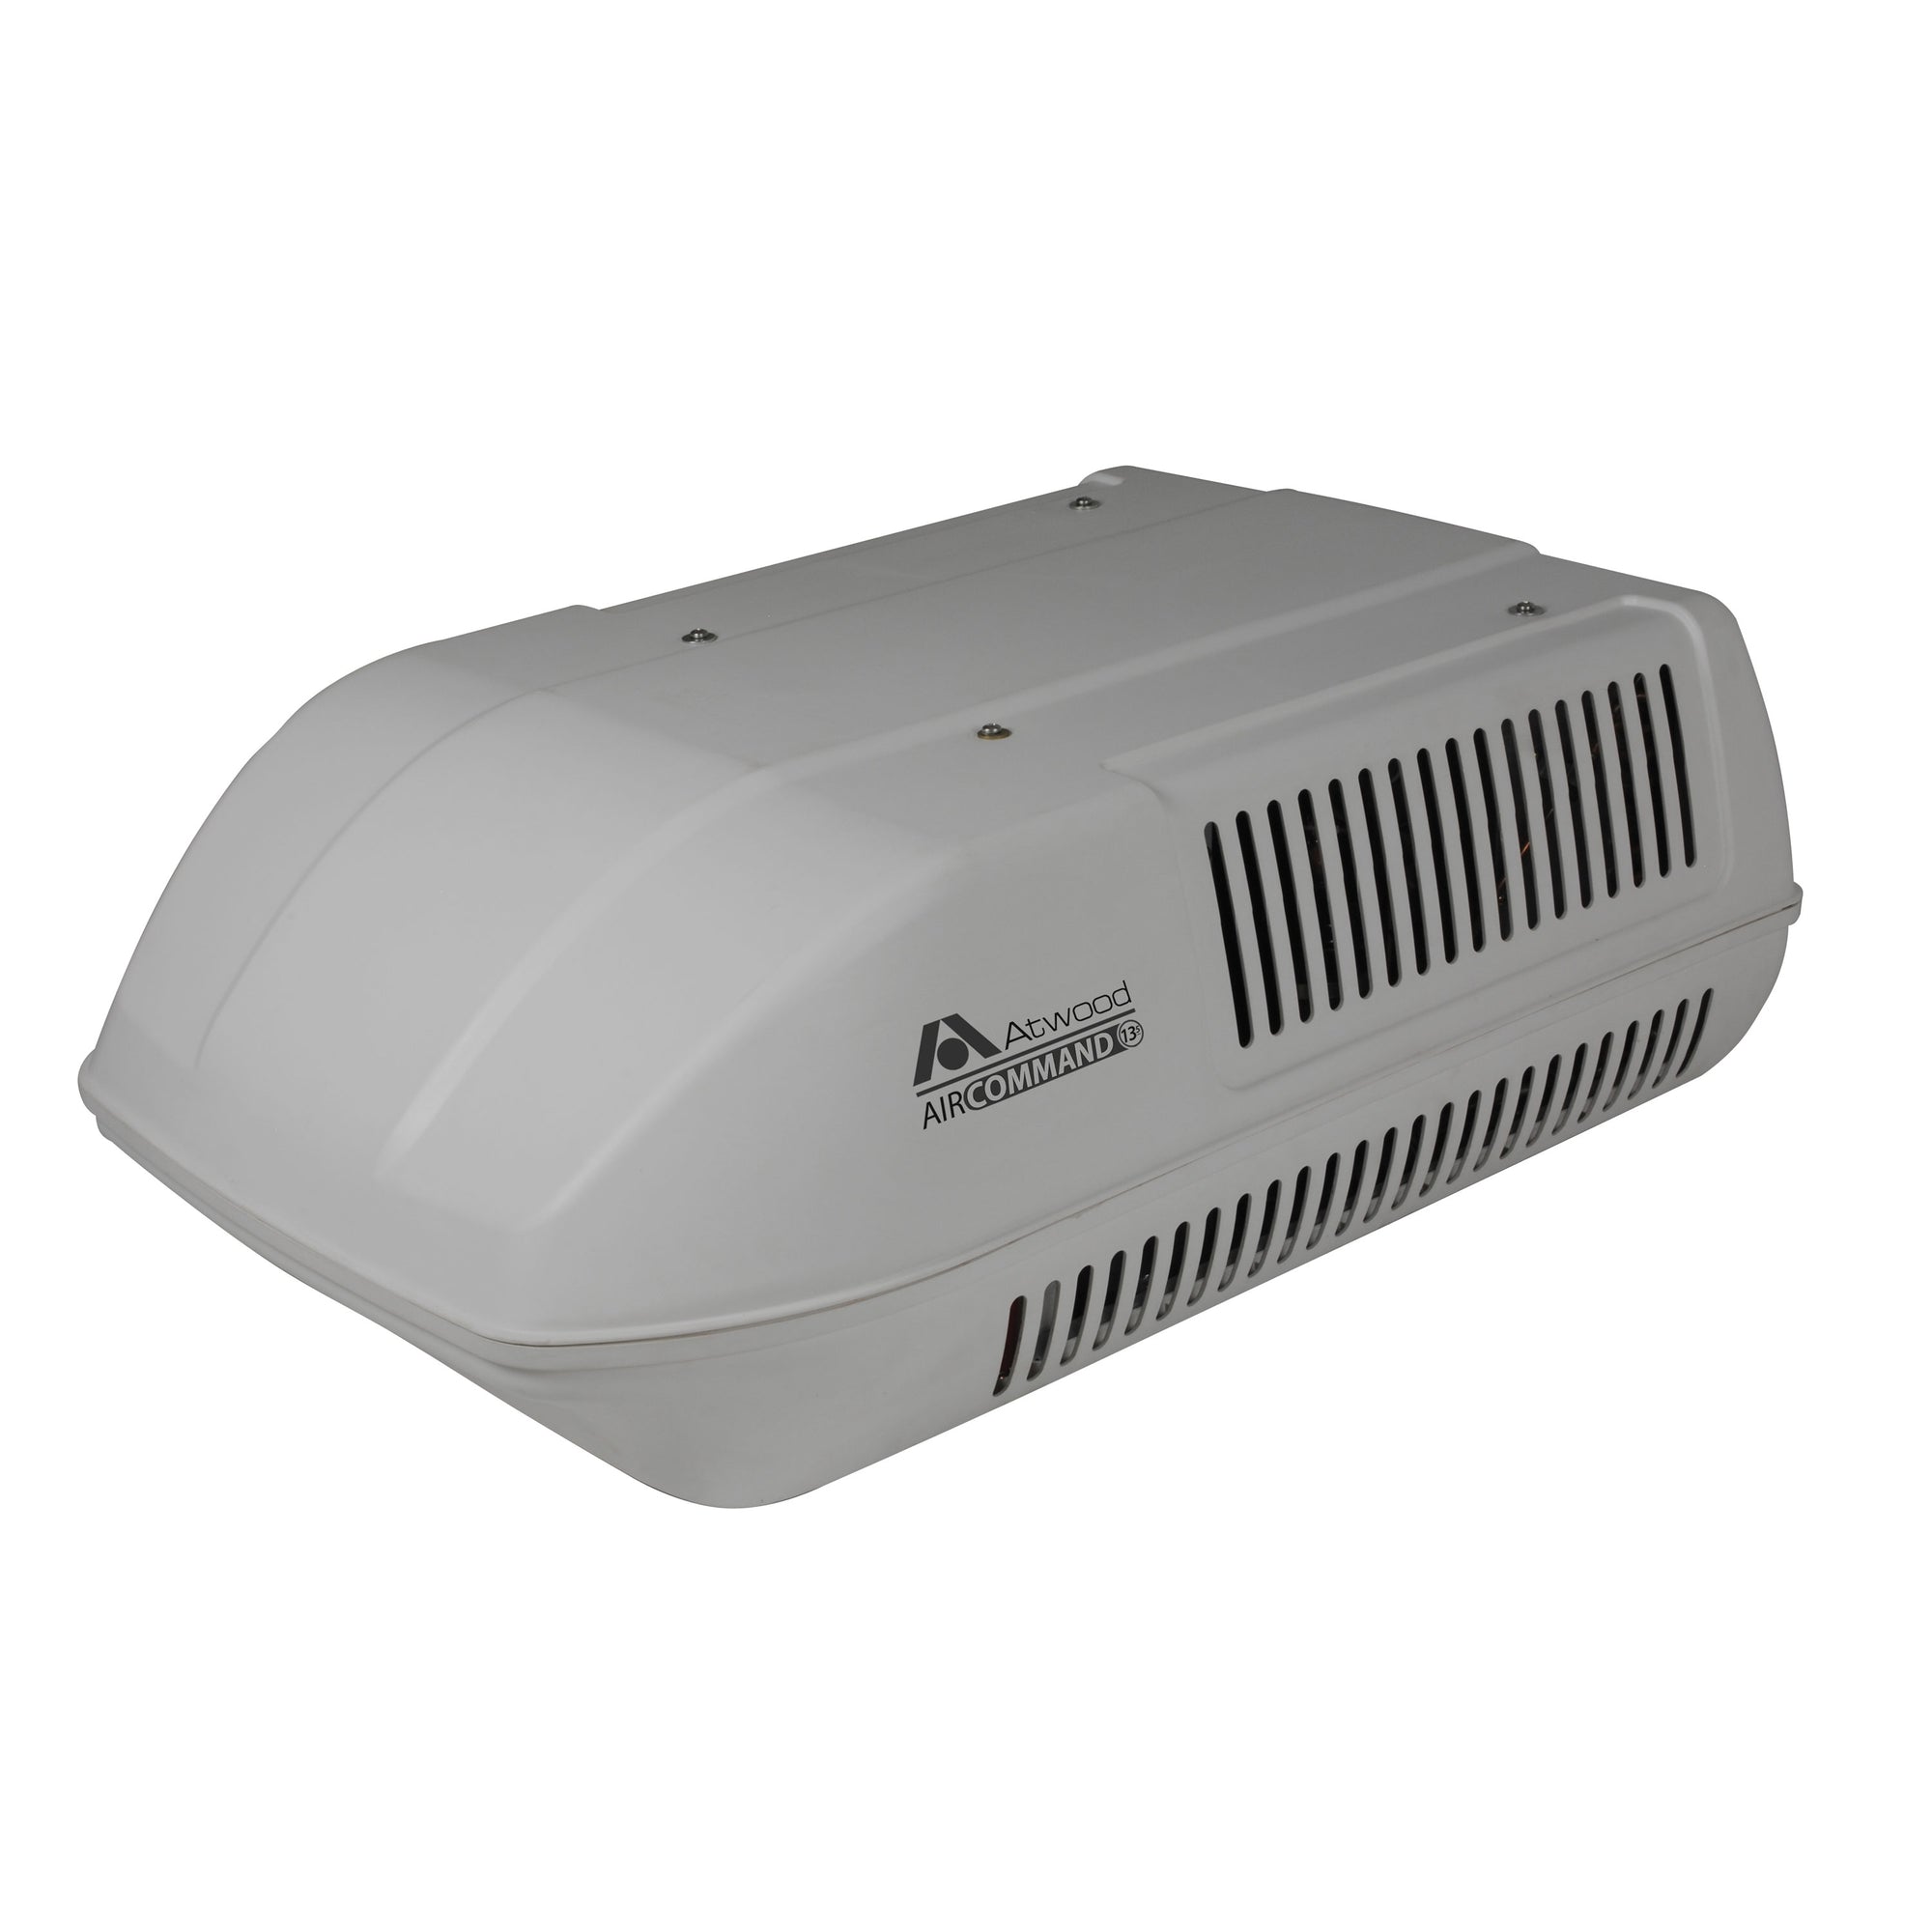 Atwood 15027 AirCommand 13.5K BTU Rooftop Air Conditioner - Ducted, White